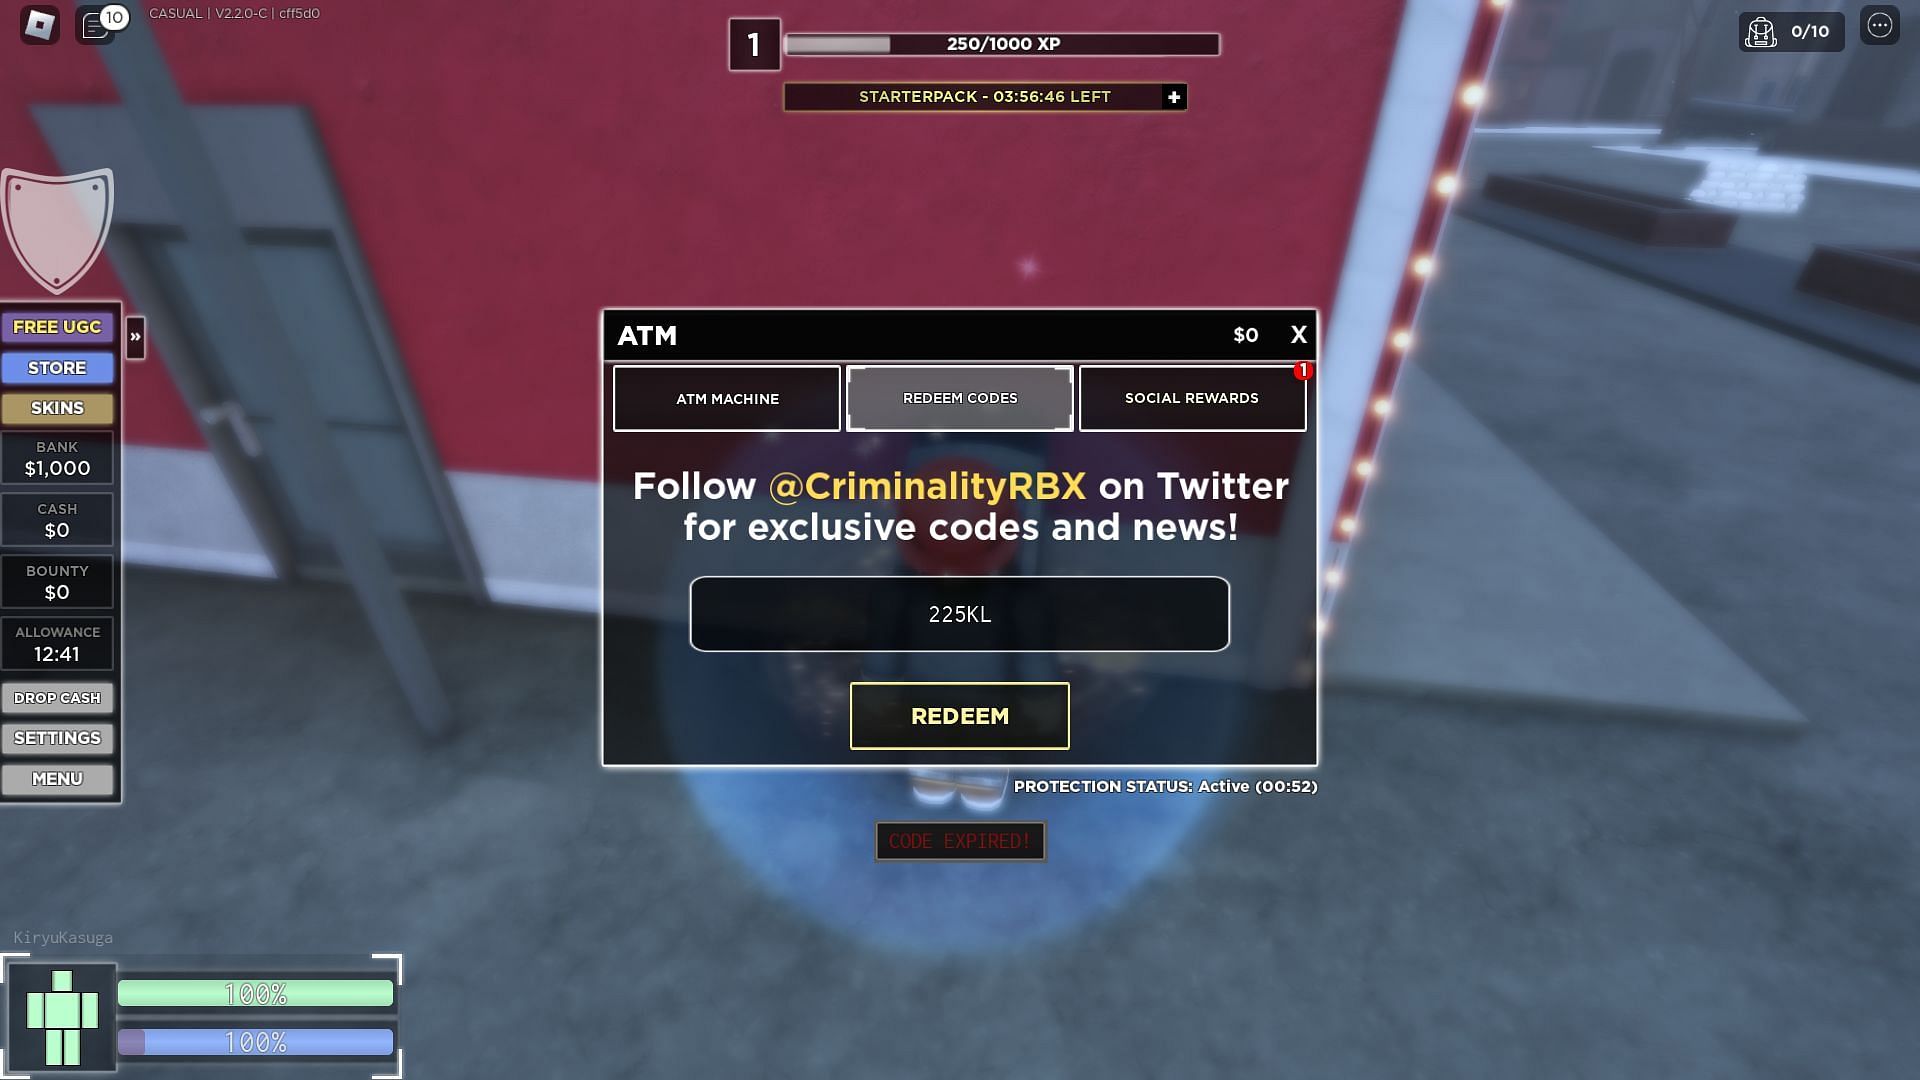 Troubleshooting codes for Criminality (Image via Roblox)